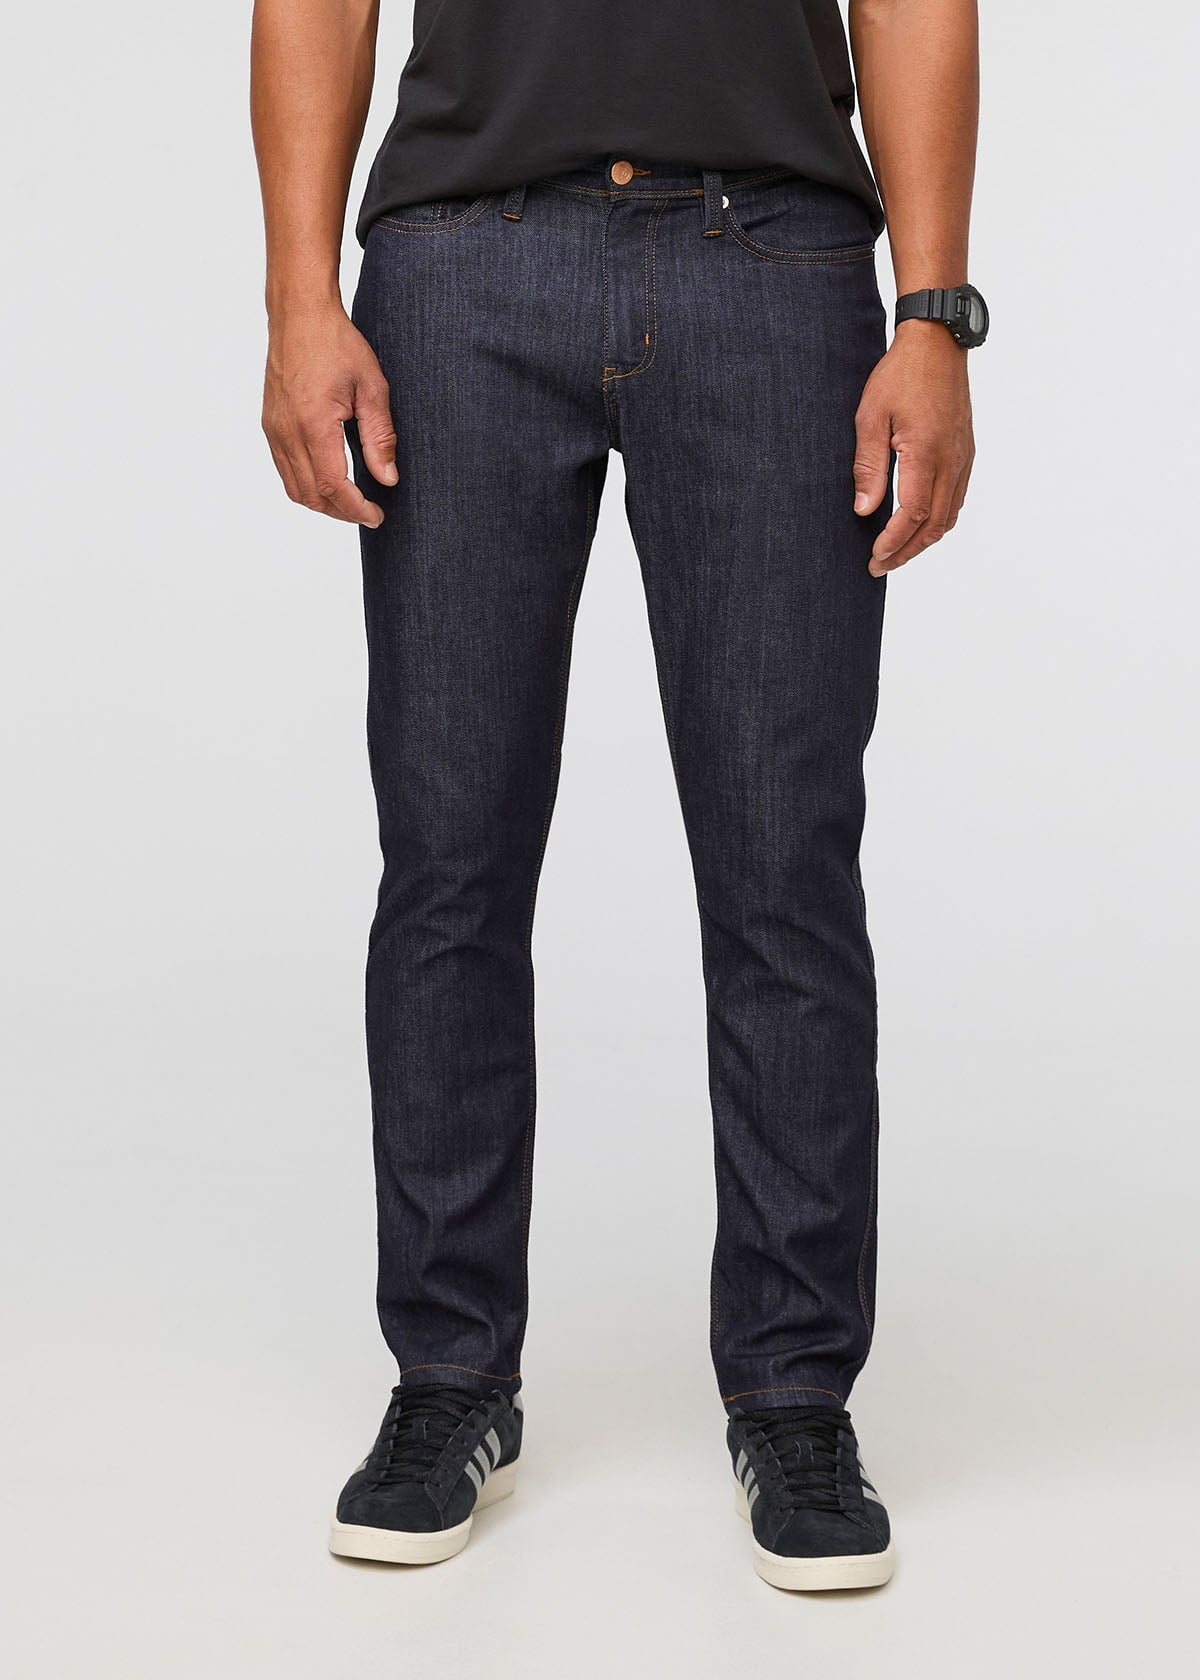 Relaxed Fit Rigid Jeans | boohooMAN USA